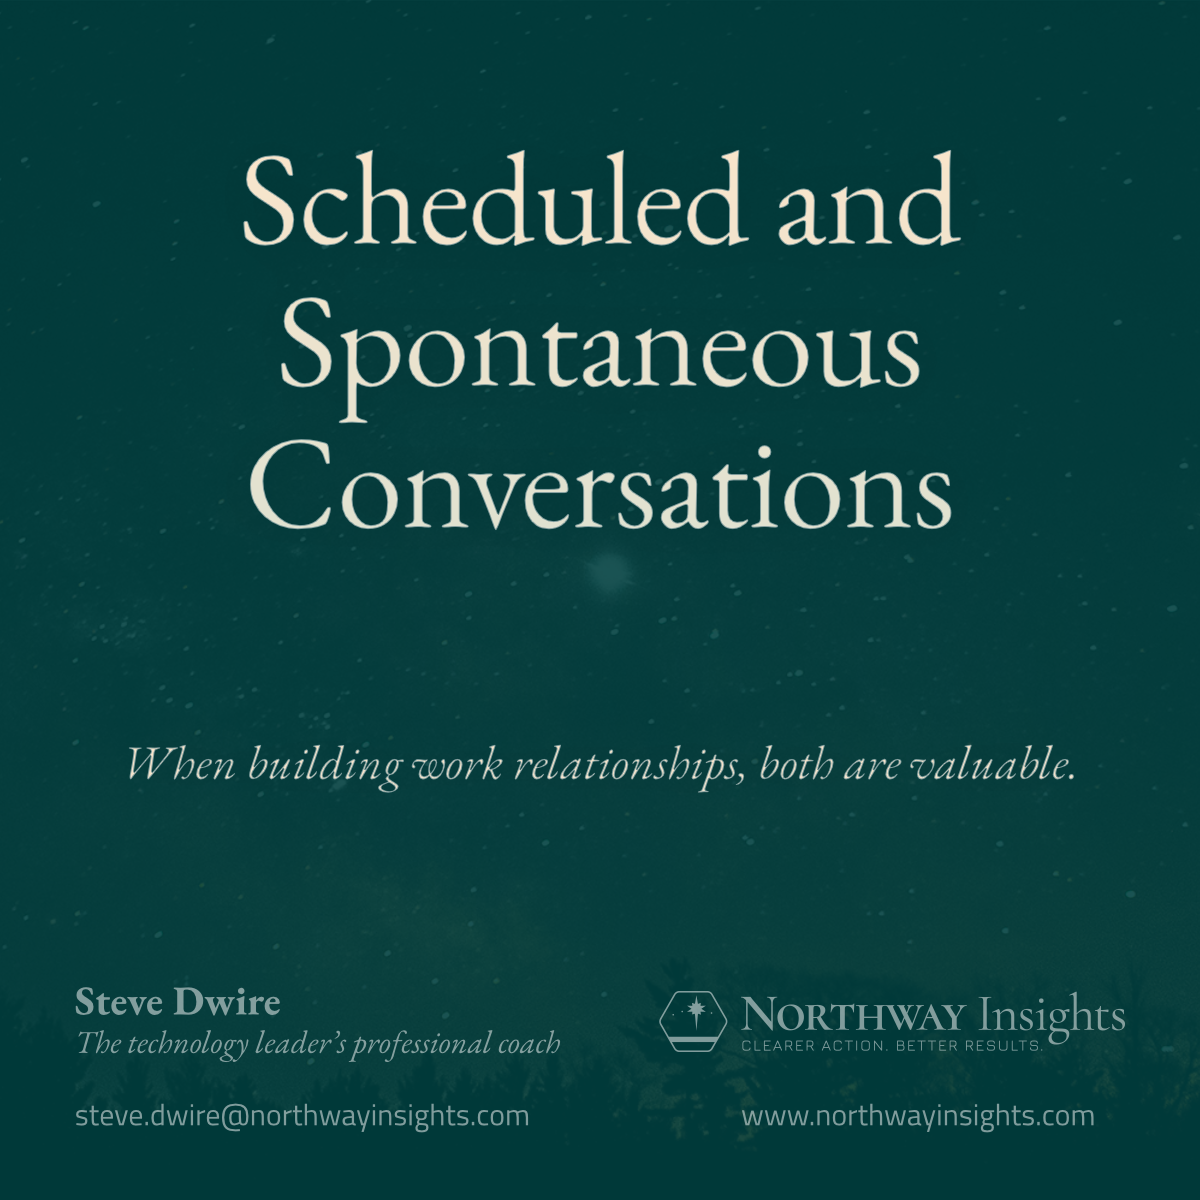 Scheduled and Spontaneous Conversation (When building work relationships, both are valuable.)